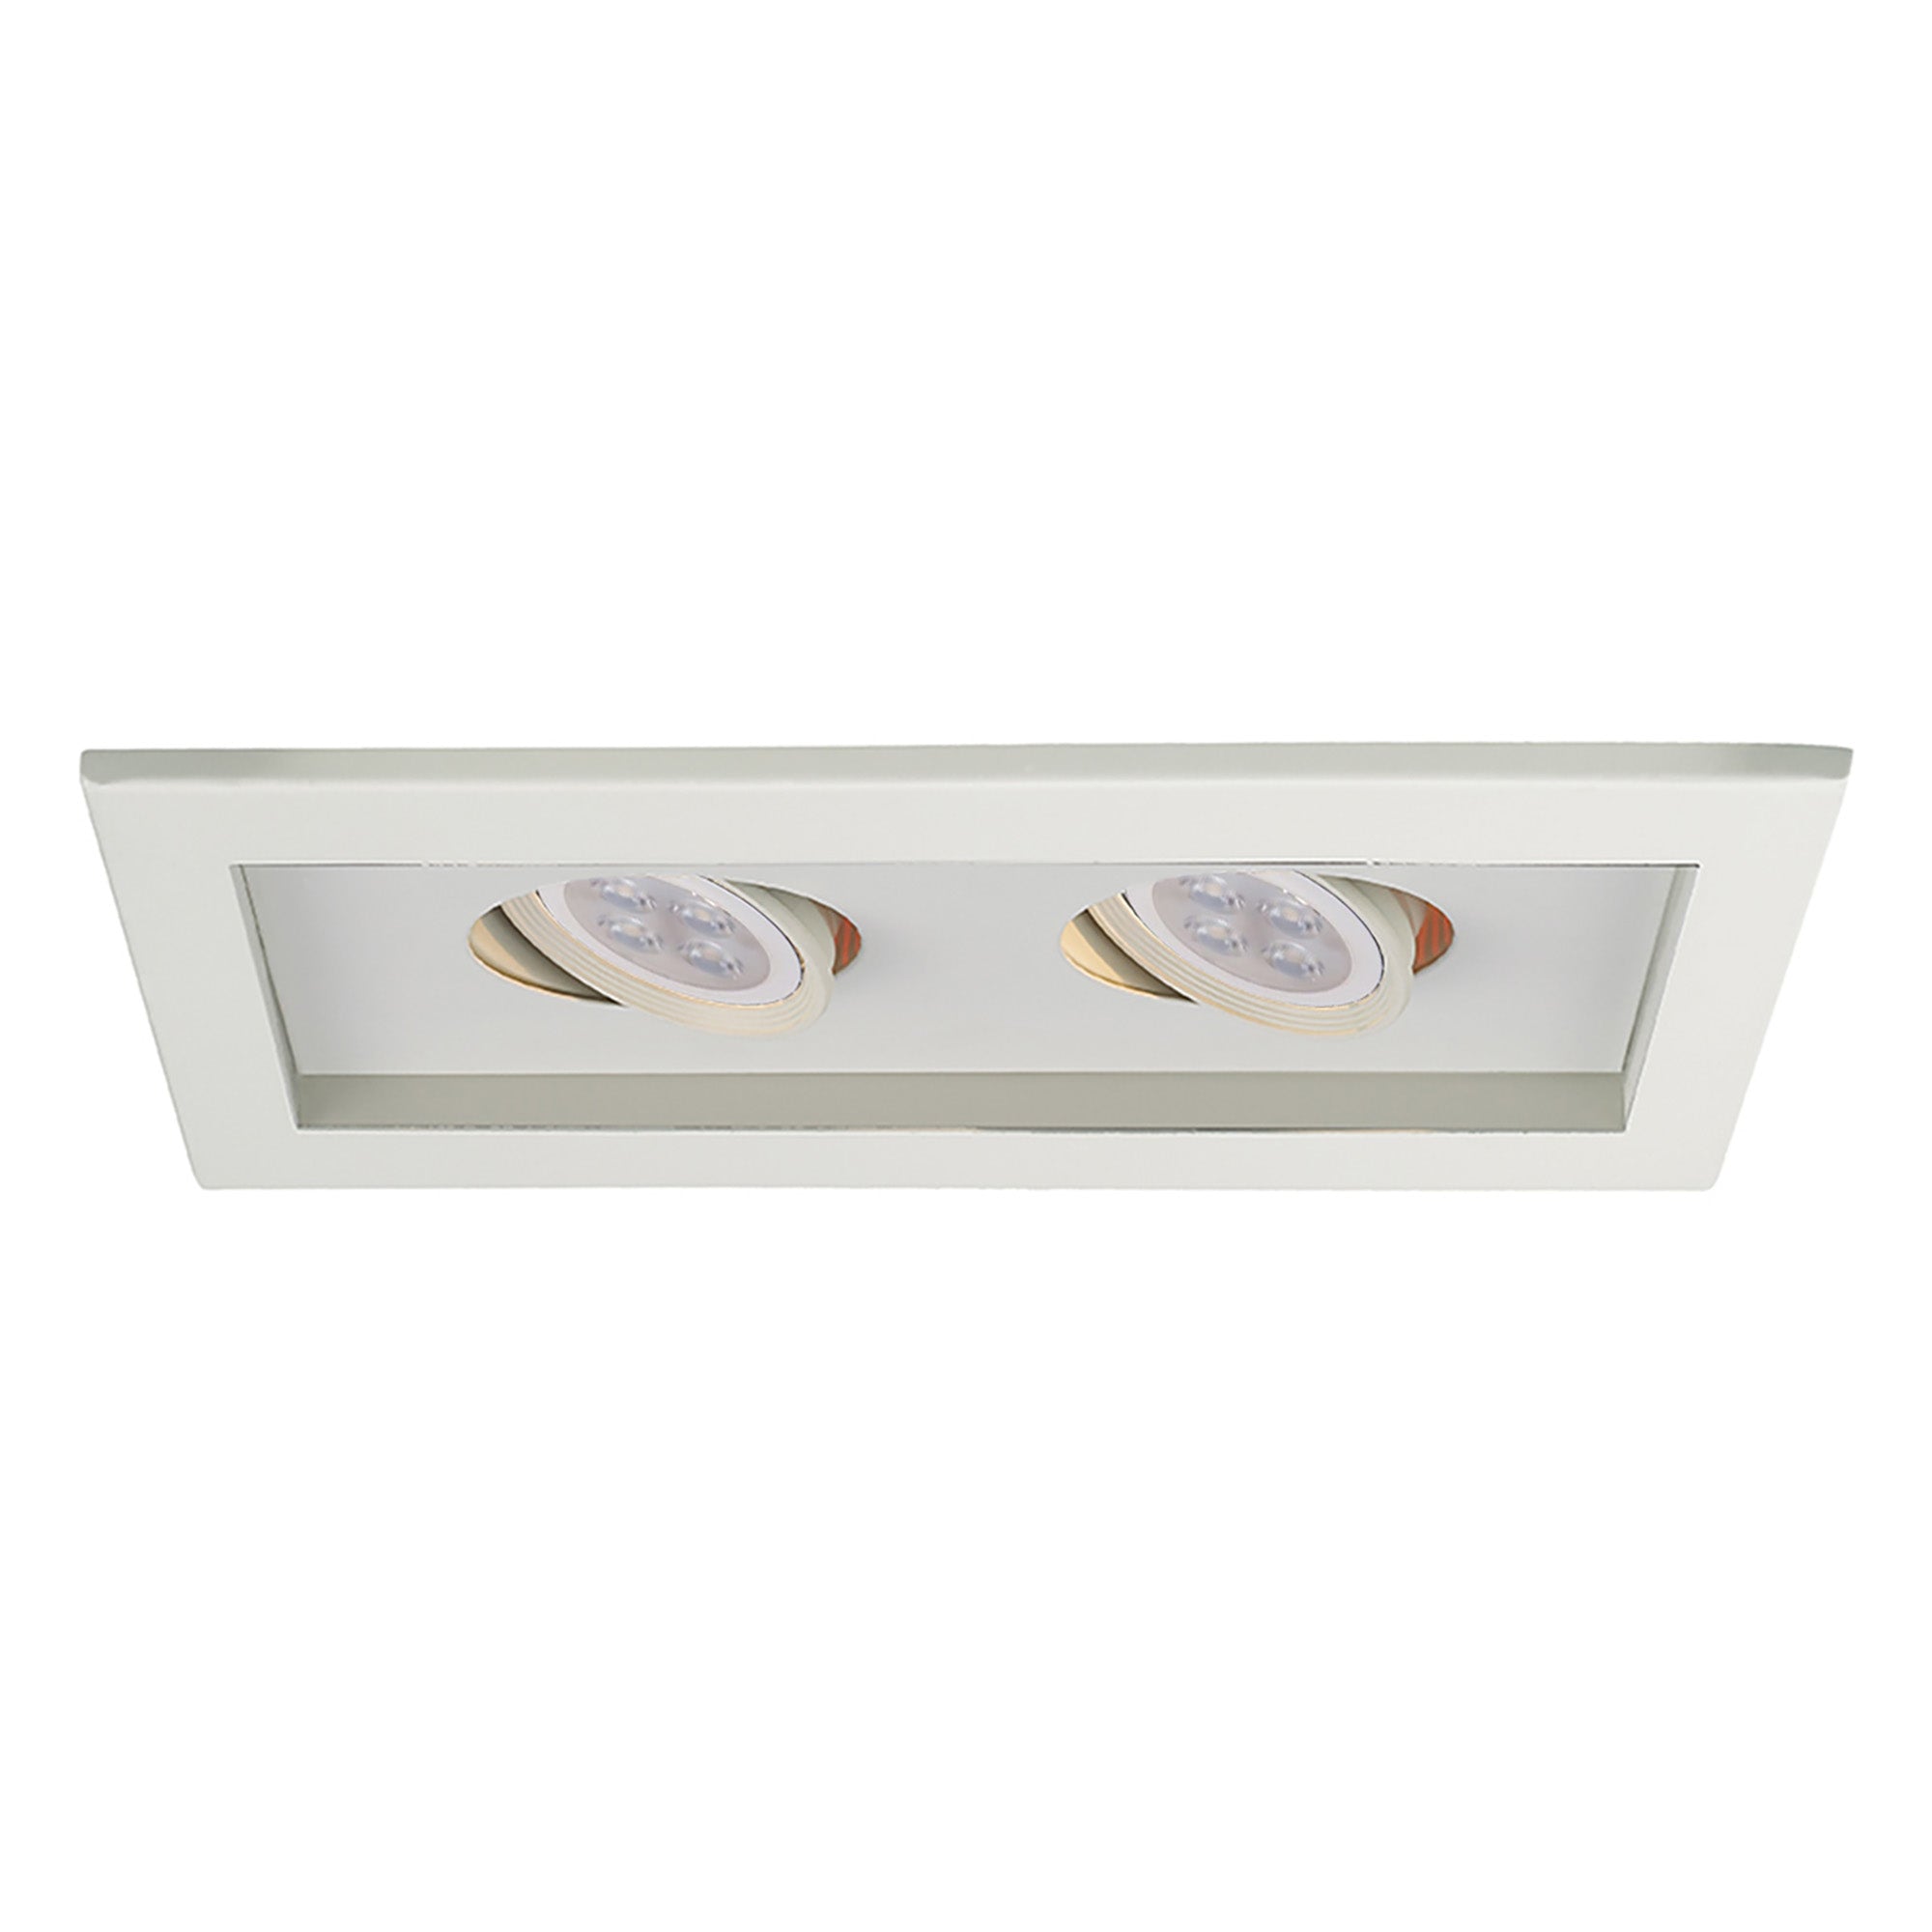 Low Voltage Multiple Two Light Trim with LED Bulb